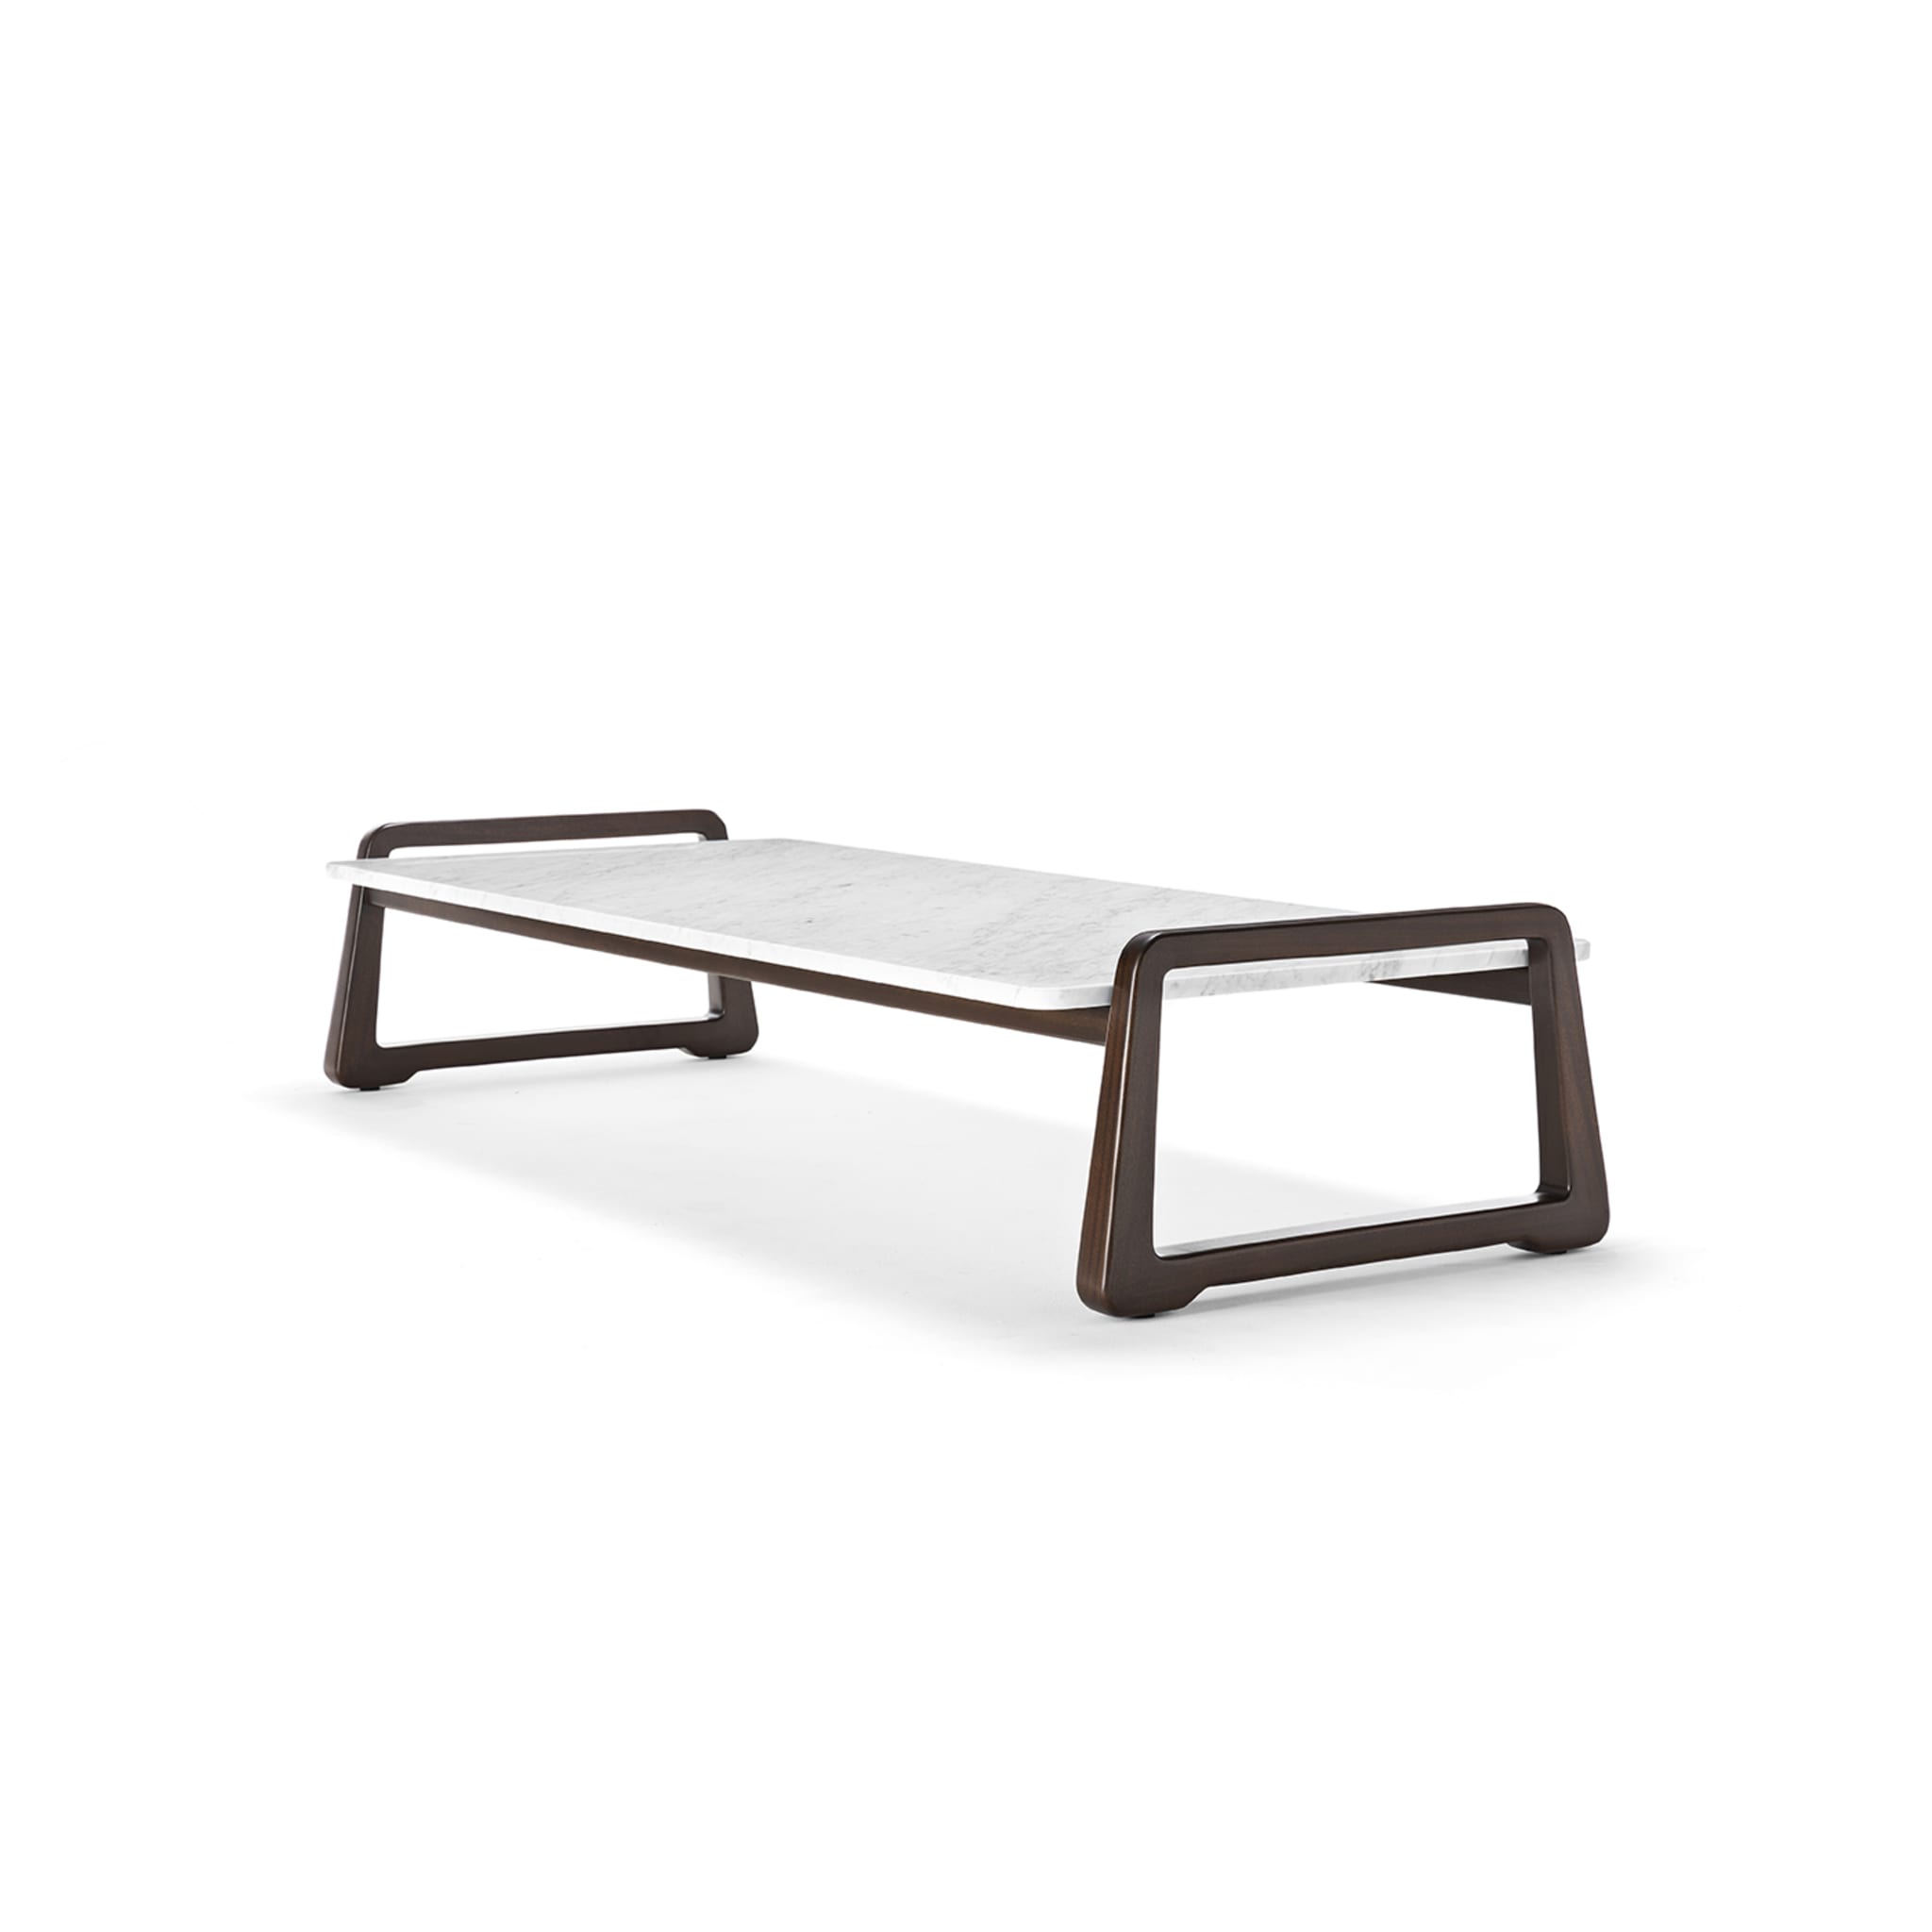 Sunset Rectangular Coffee Table by Paola Navone - Alternative view 2